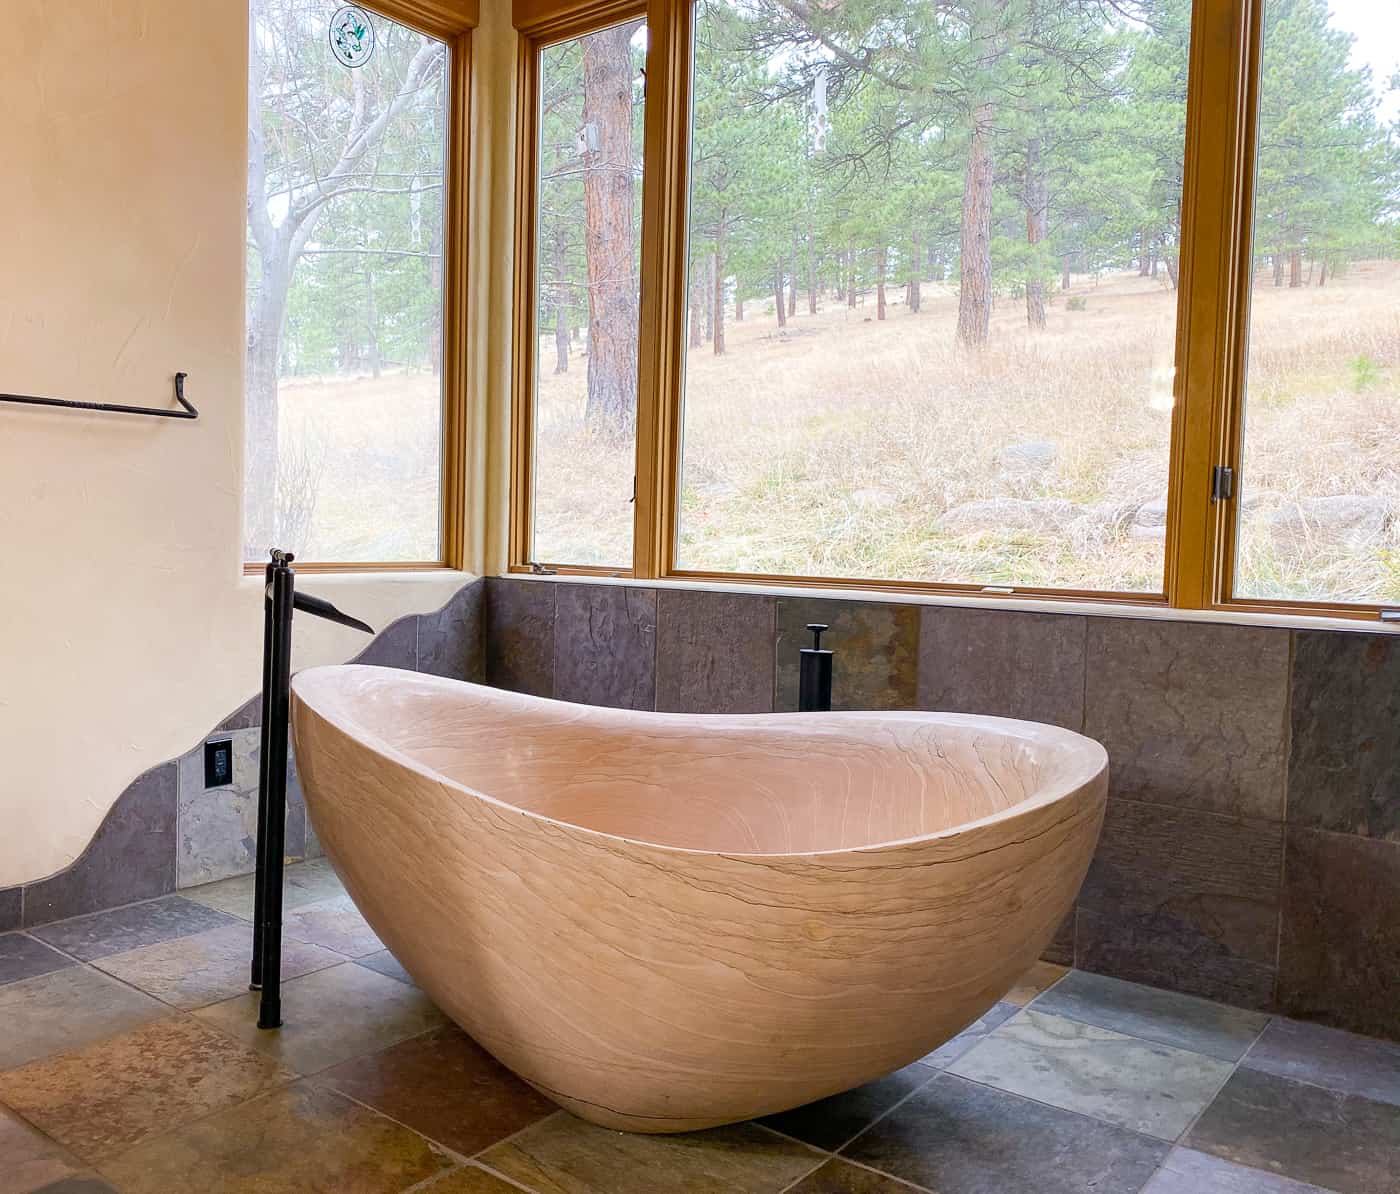 Light-filled bathroom with 2 ton freestanding stone tub